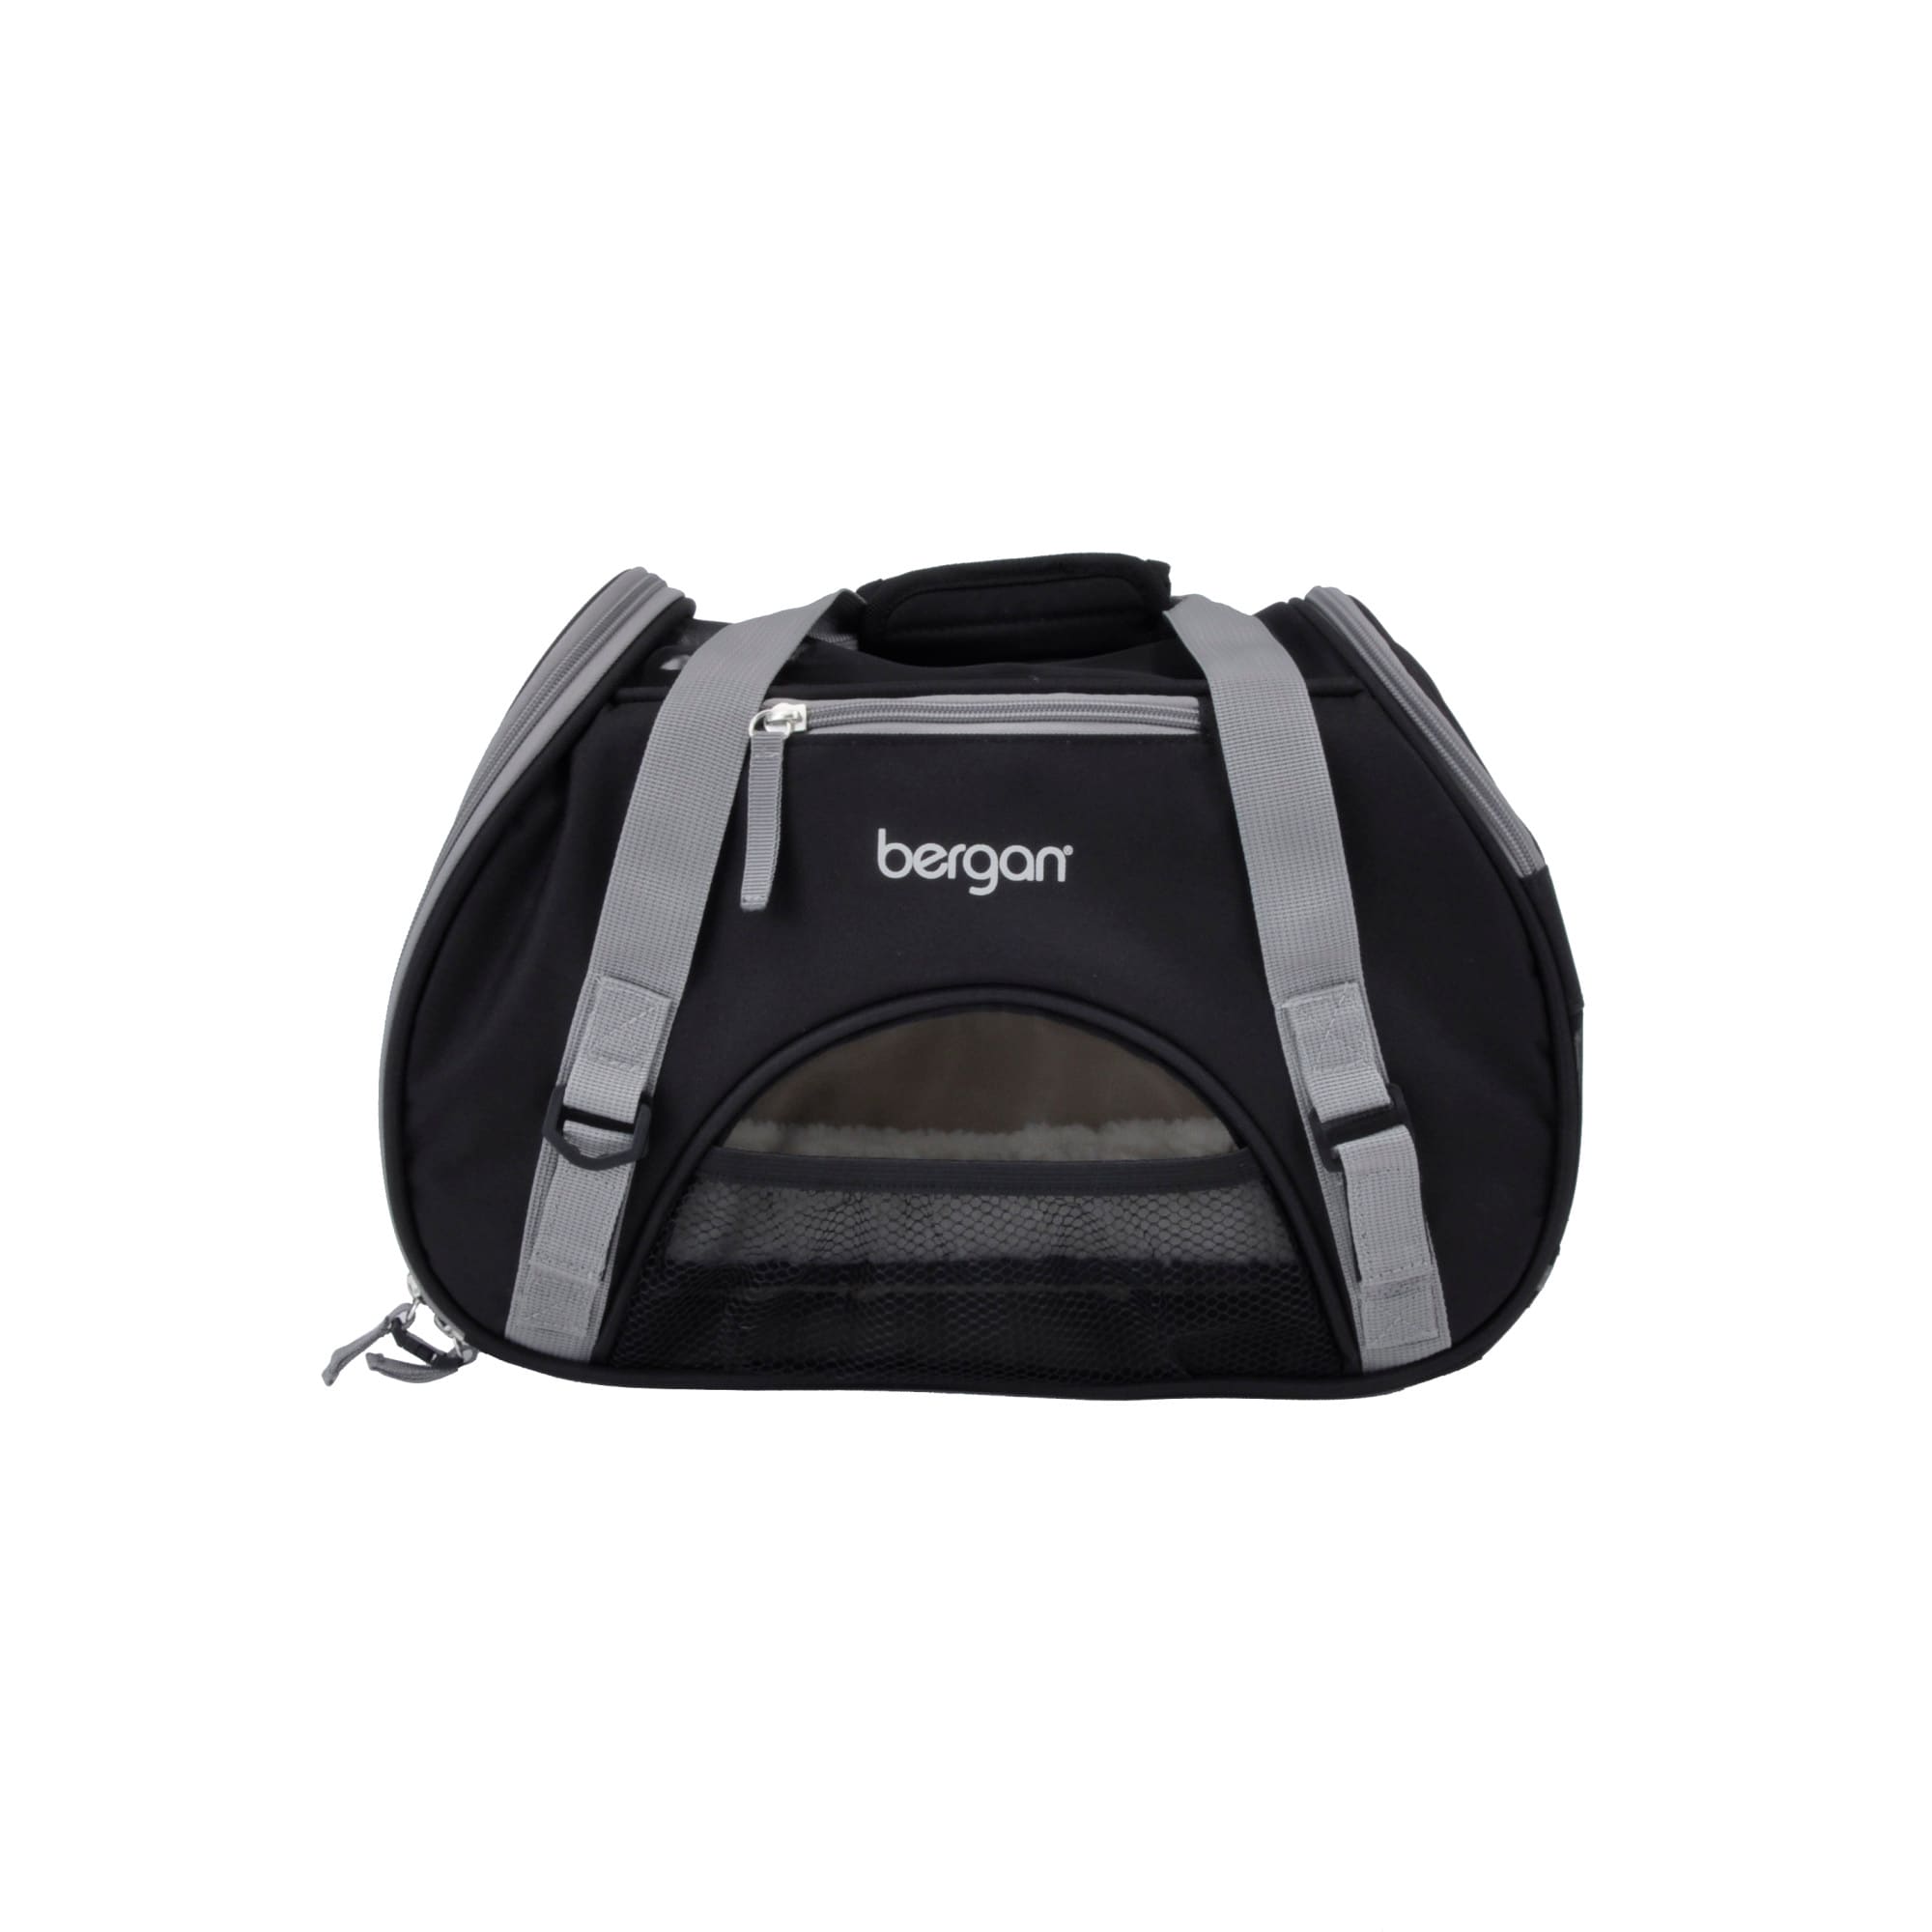 Bergan Black with Grey Comfort Carrier for Dogs, 16" L X 8" W X 11" H, Small